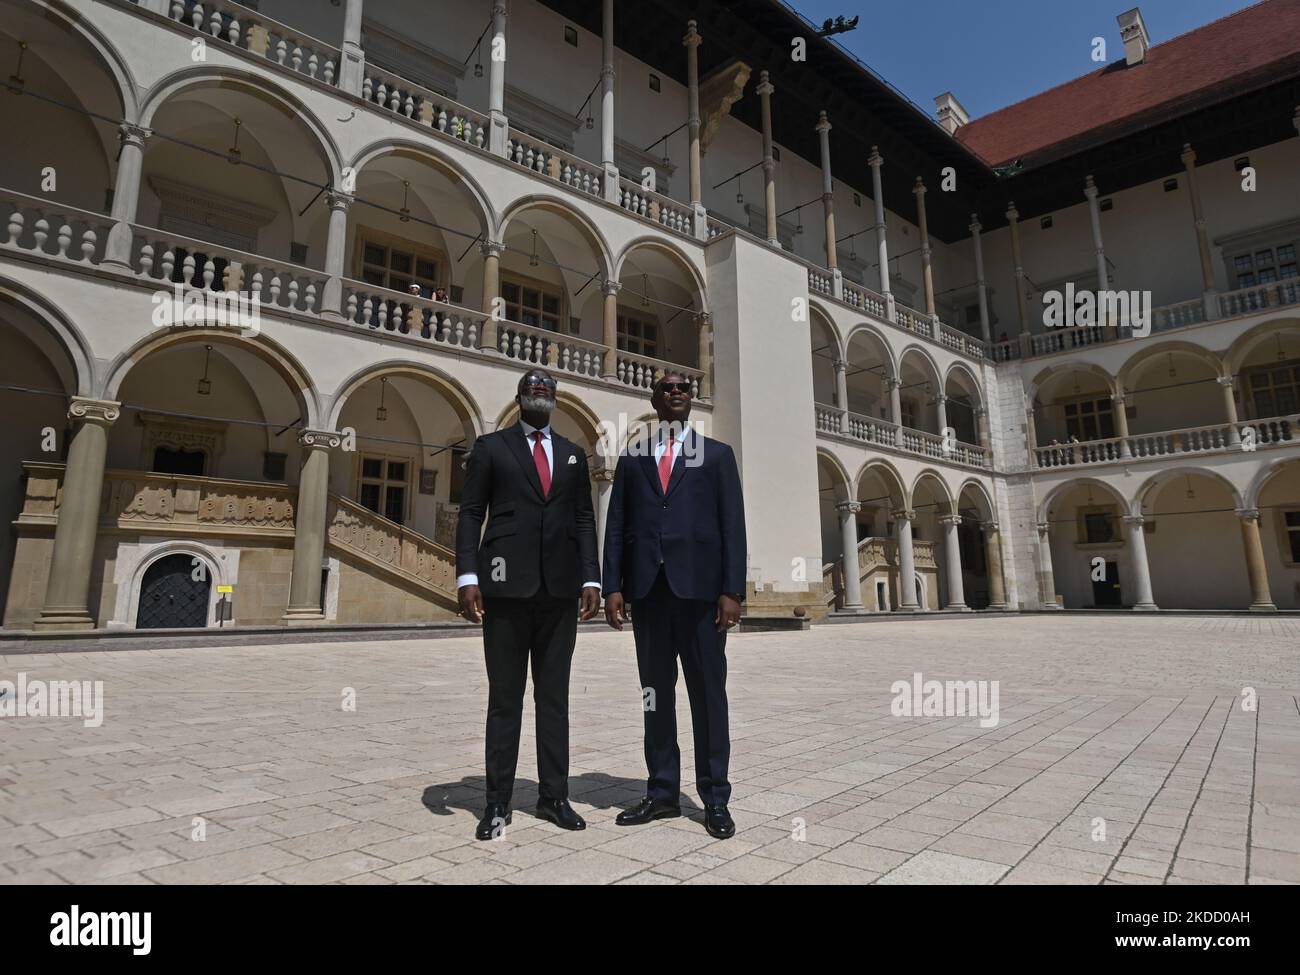 Nuno Gomes Nabiam (R), Prime Minister of Guinea-Bissau and Fidelis Forbs (L), Minister of Public Works, Housing and Urban Planning of Guinea-Bissau during the visit of Wawel Castle in Krakow. Both politicians traveled to Poland to take part in a major United Nations conference on urban development in Katowice this week. On Wednesday, June 29, 2022, in Wawel Castle, Krakow, Poland. (Photo by Artur Widak/NurPhoto) Stock Photo